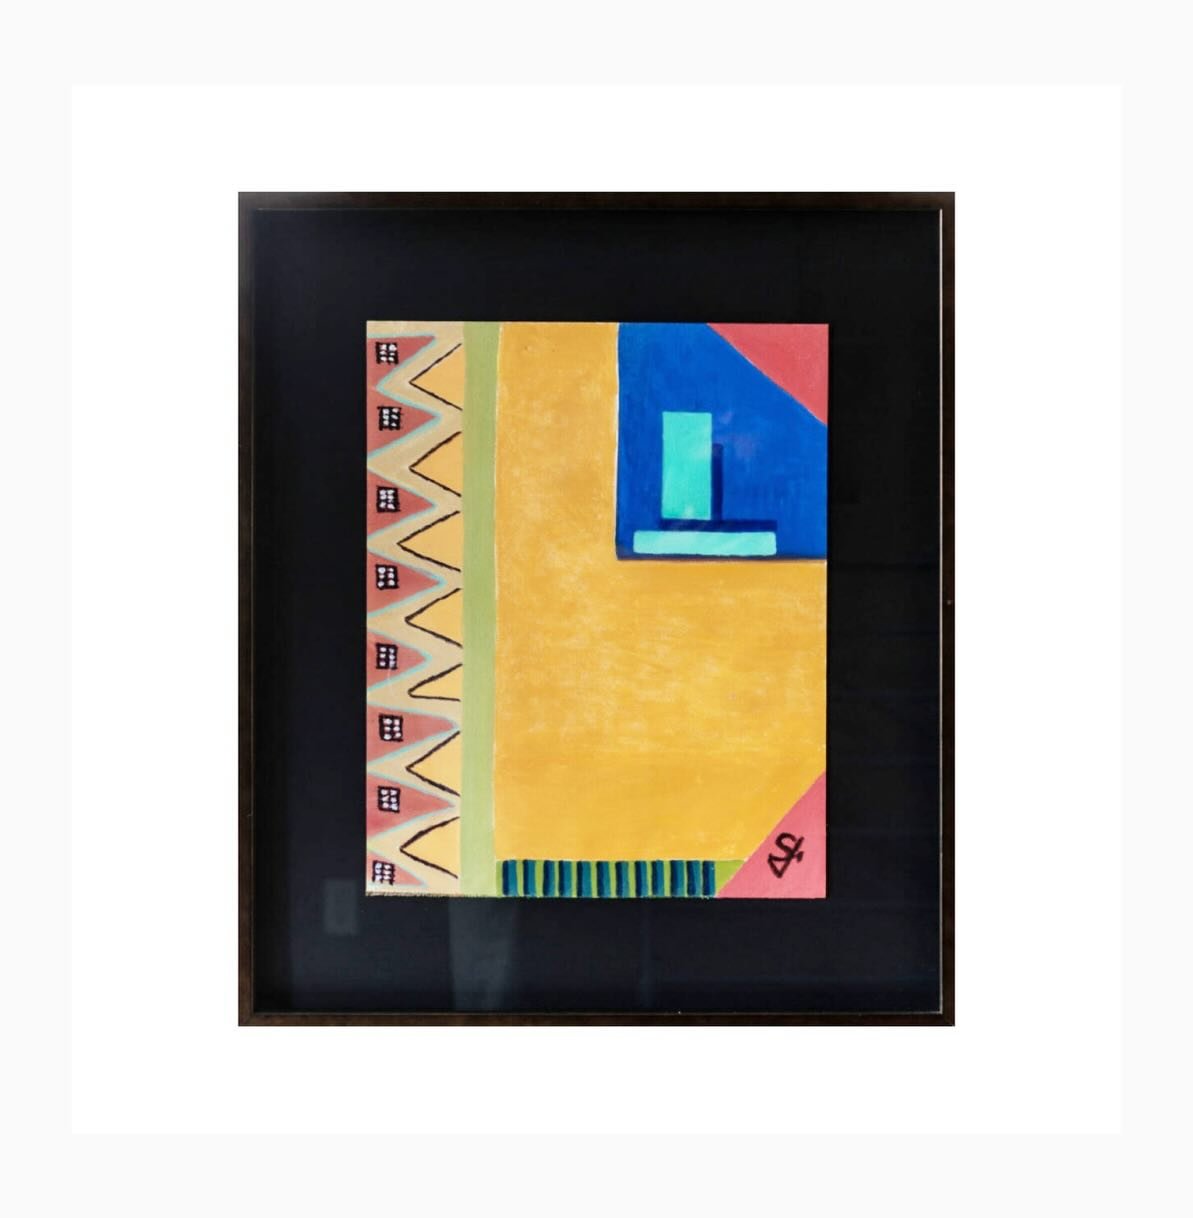 Keep It Simple 

Keep gift giving simple for mom this year, with FRAMED original art. 
Happy Mother&rsquo;s Day!
Purchase at the link in bio.
&bull;
&bull;
&bull;
#mothersday #giftgiving #celebratemom #framedart #originalart #memphisartist